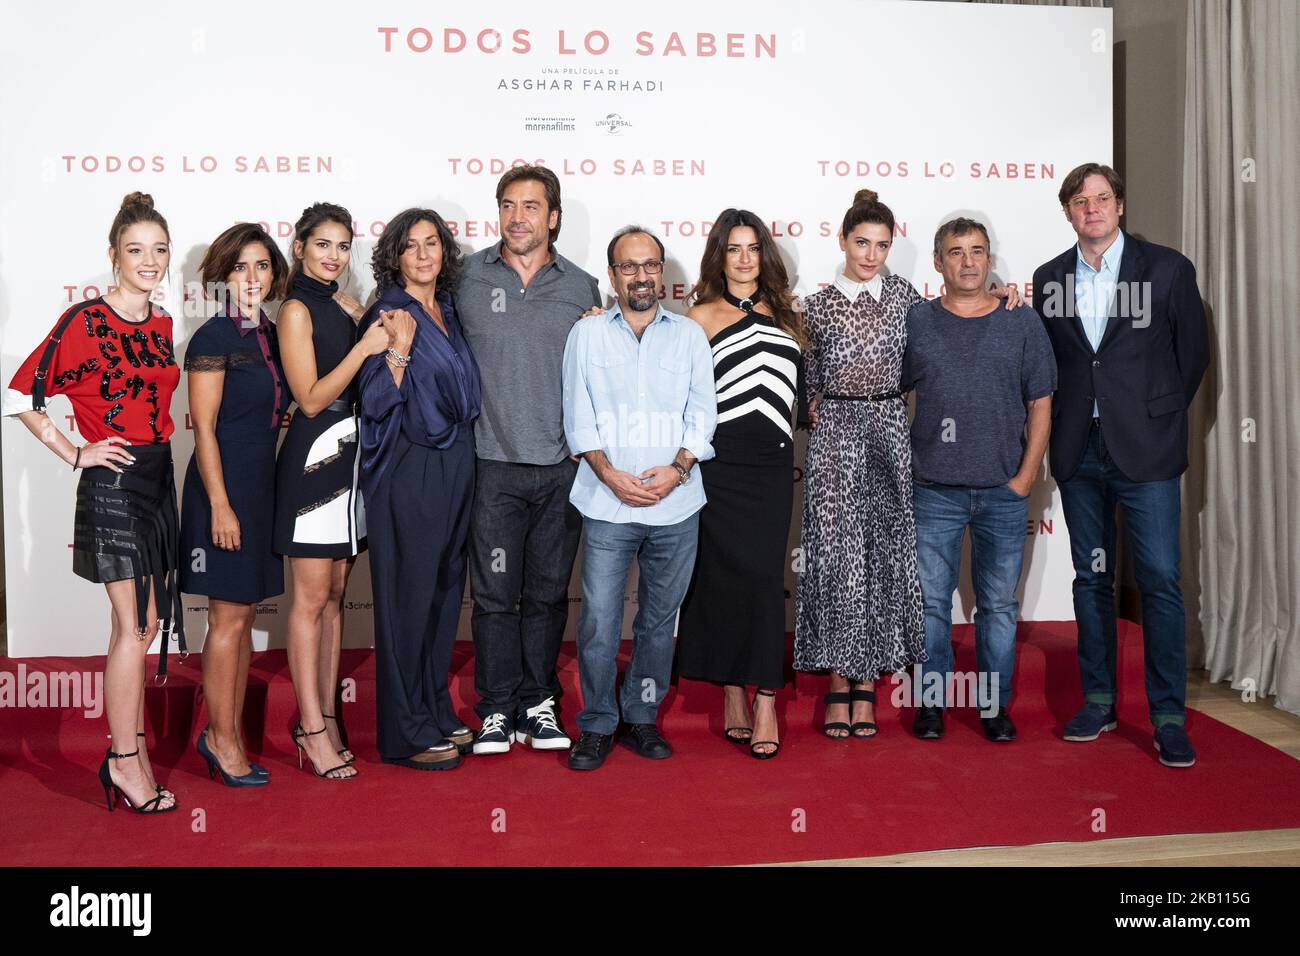 Asghar Farhadi and Penelope (L-R) Spanish actress Carla Campra, Spanish actress Inma Cuesta, Spanish actress Sara Salamo, Spanish actress Elvira Minguez, Spanish actor Javier Bardem, Iranian director Asghar Farhadi, Spanish actress Penelope Cruz, Spanish actress Barbara Lennie, Spanish actor Eduard Fernandez and Spanish producer Alvaro Longoria pose during a photocall for 'Todos Lo Saben' (Everybody Knows) in Madrid on September 12, 2018 (Photo by Oscar Gonzalez/NurPhoto) Stock Photo